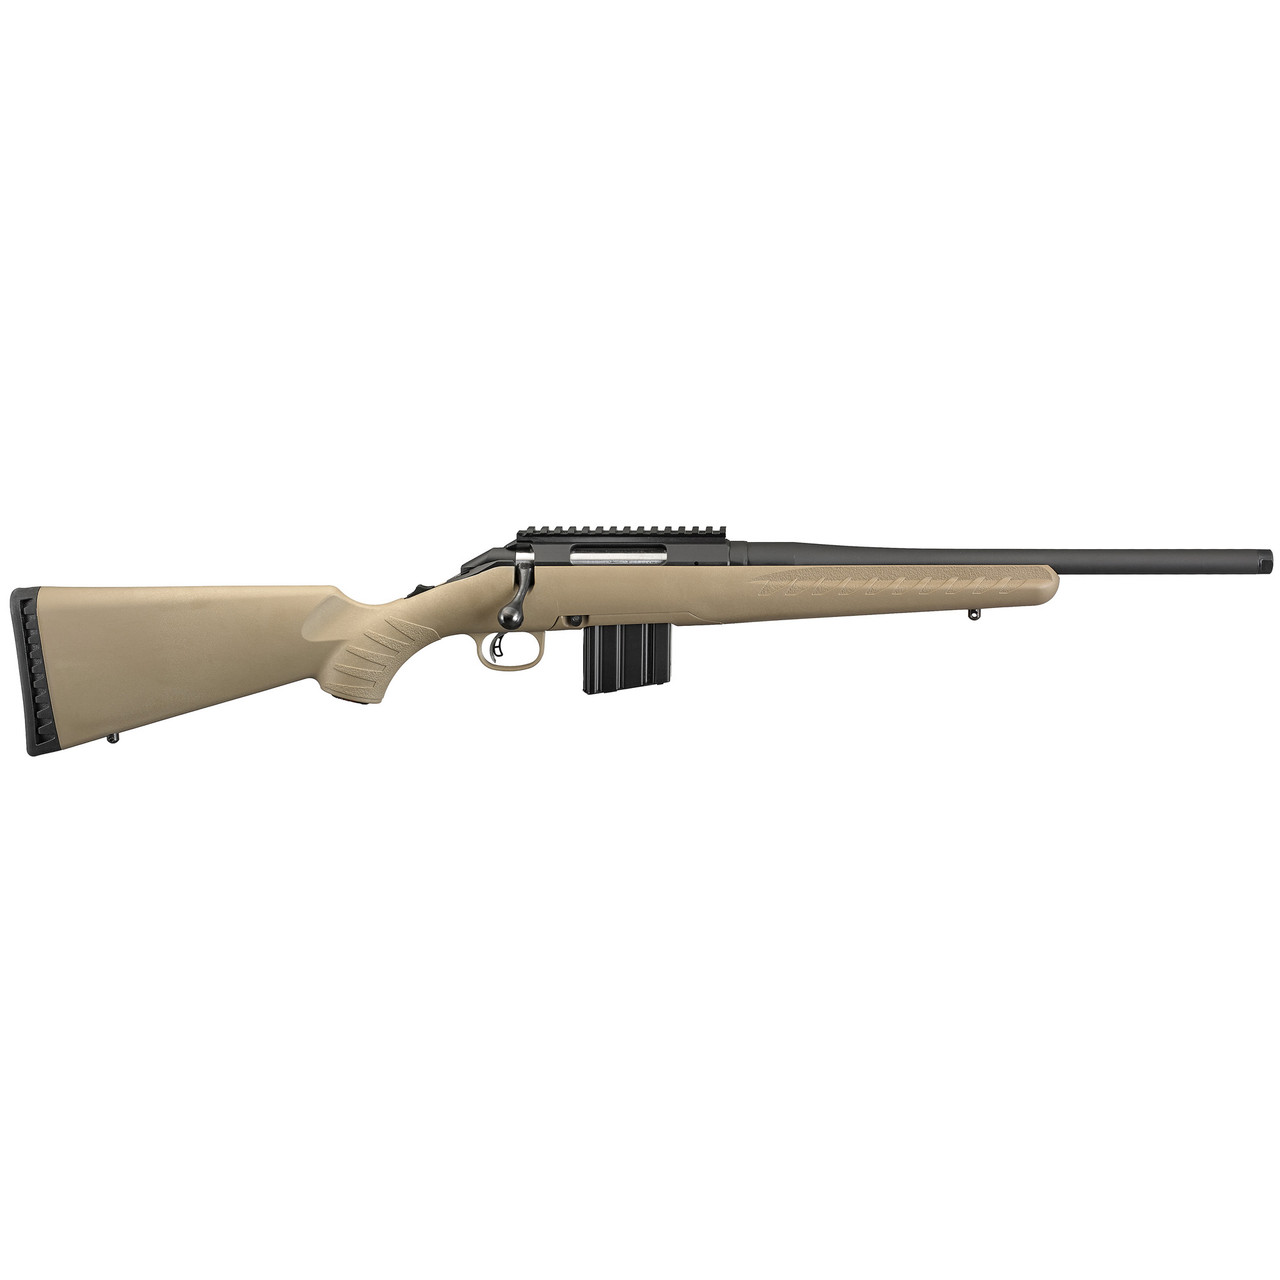 Ruger American Ranch Rifle 16.1" CALIFORNIA LEGAL - 6.5 Grendel - FDE